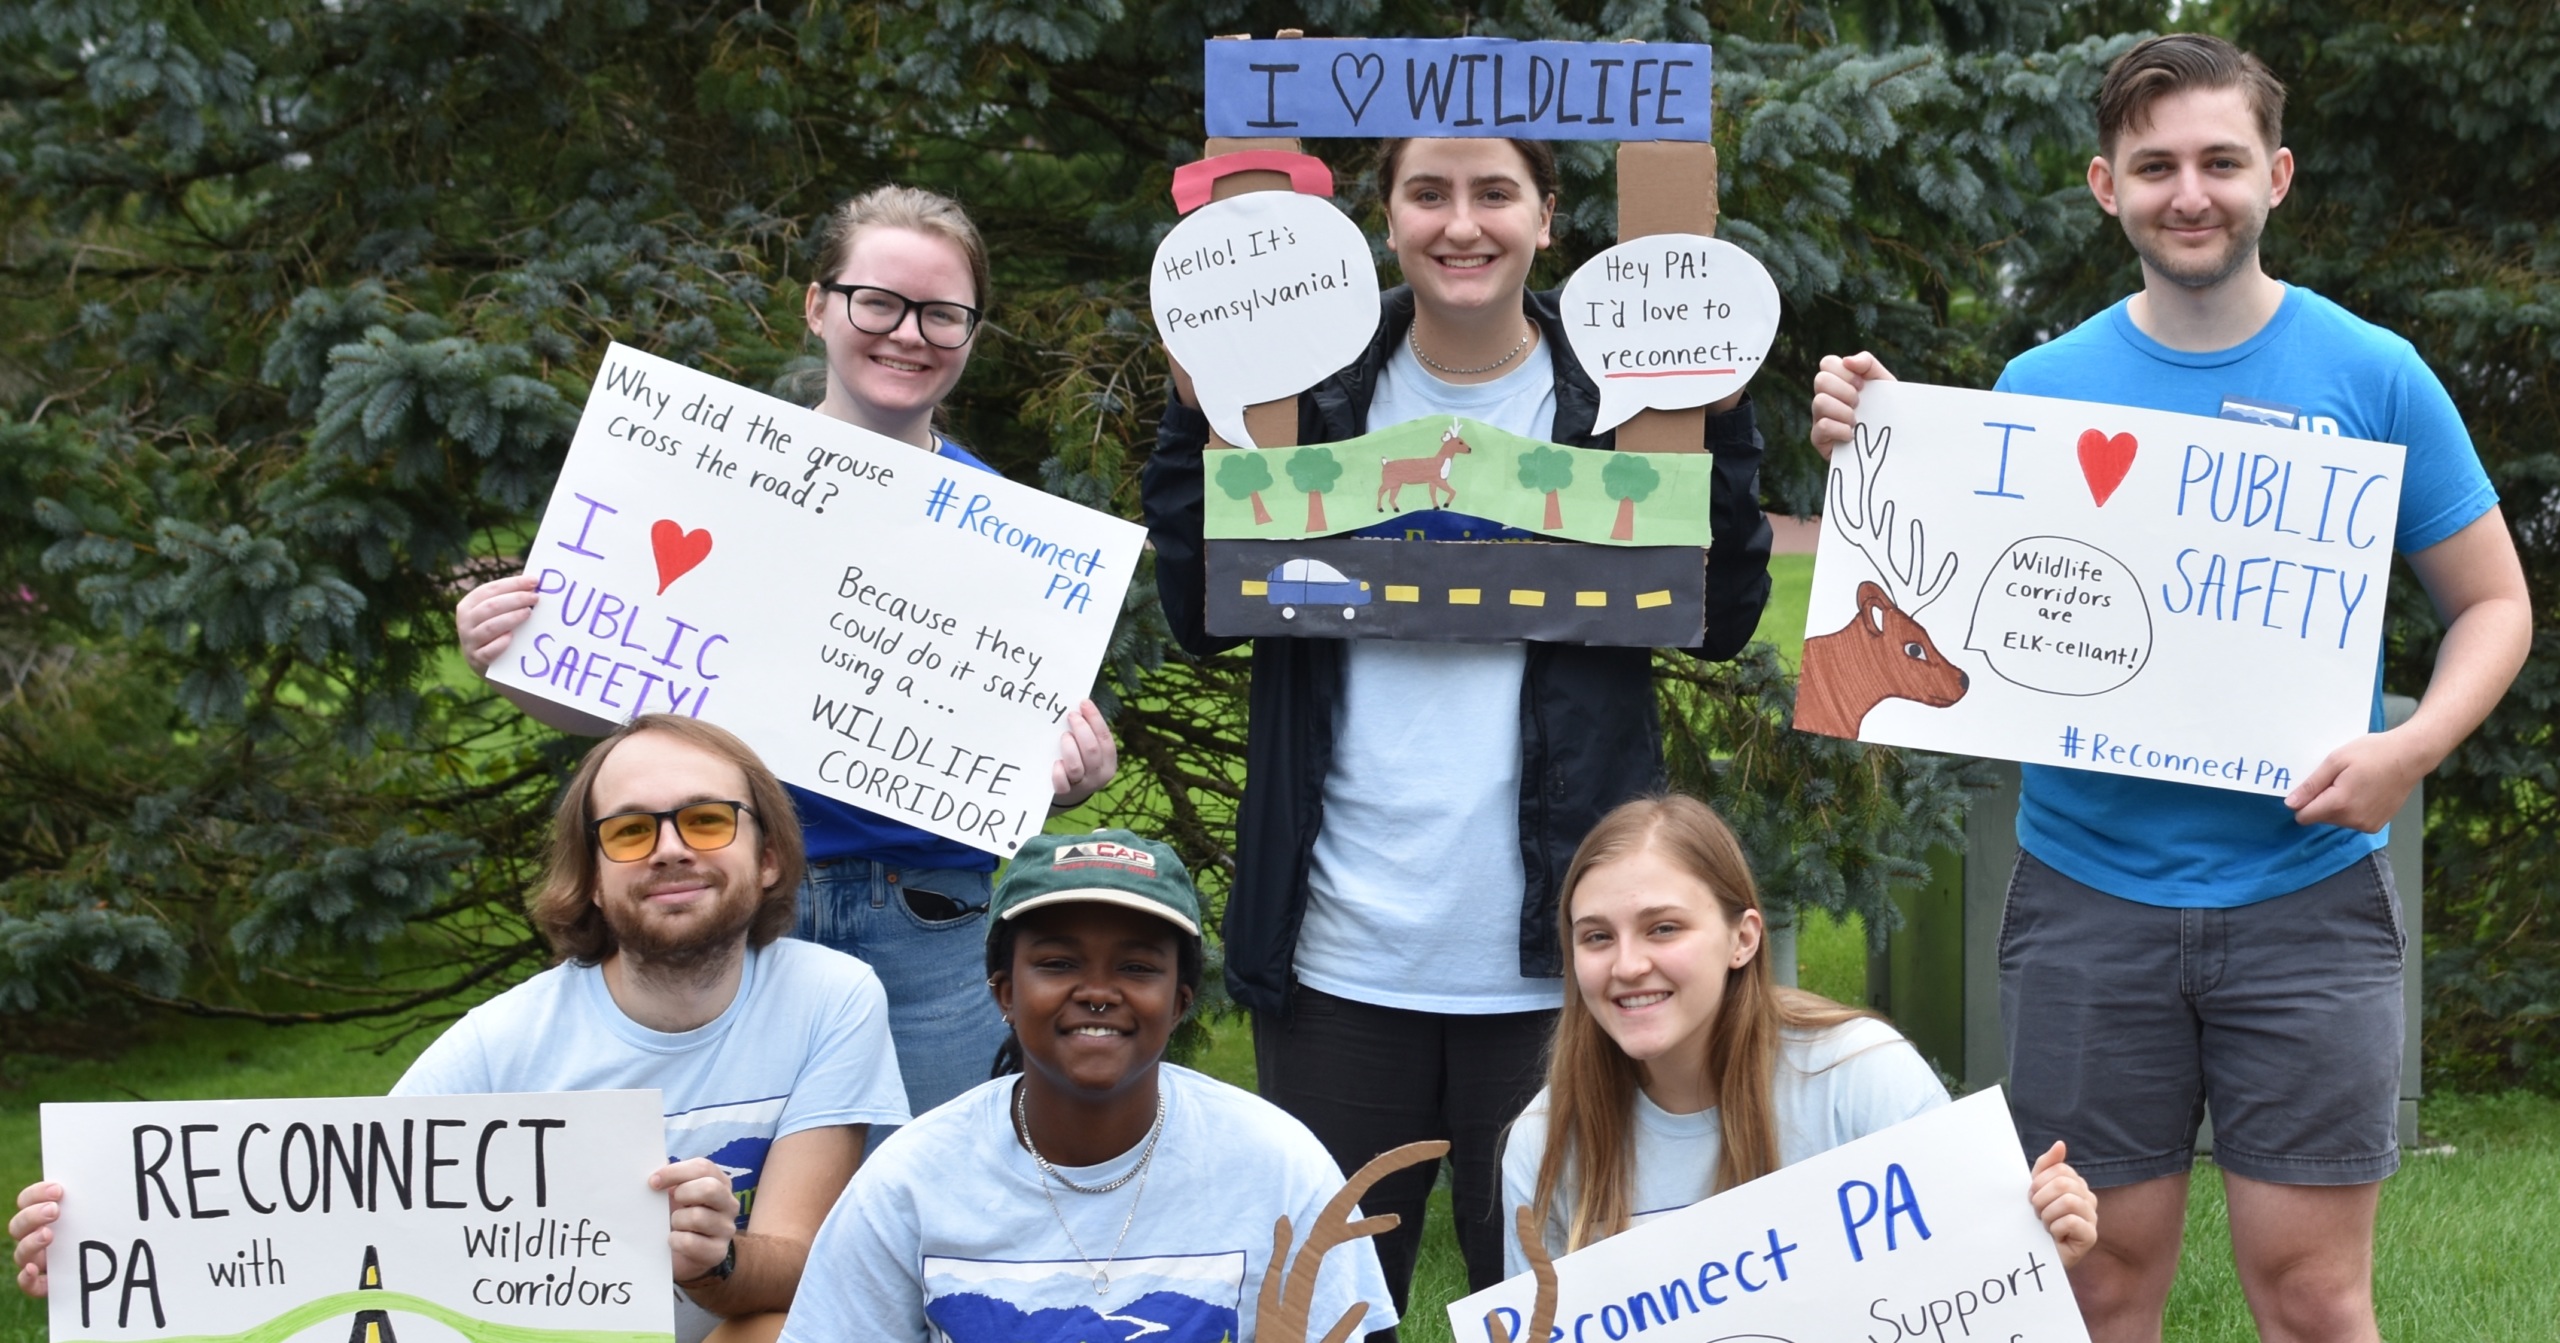 PennEnvironment staff building support for wildlife